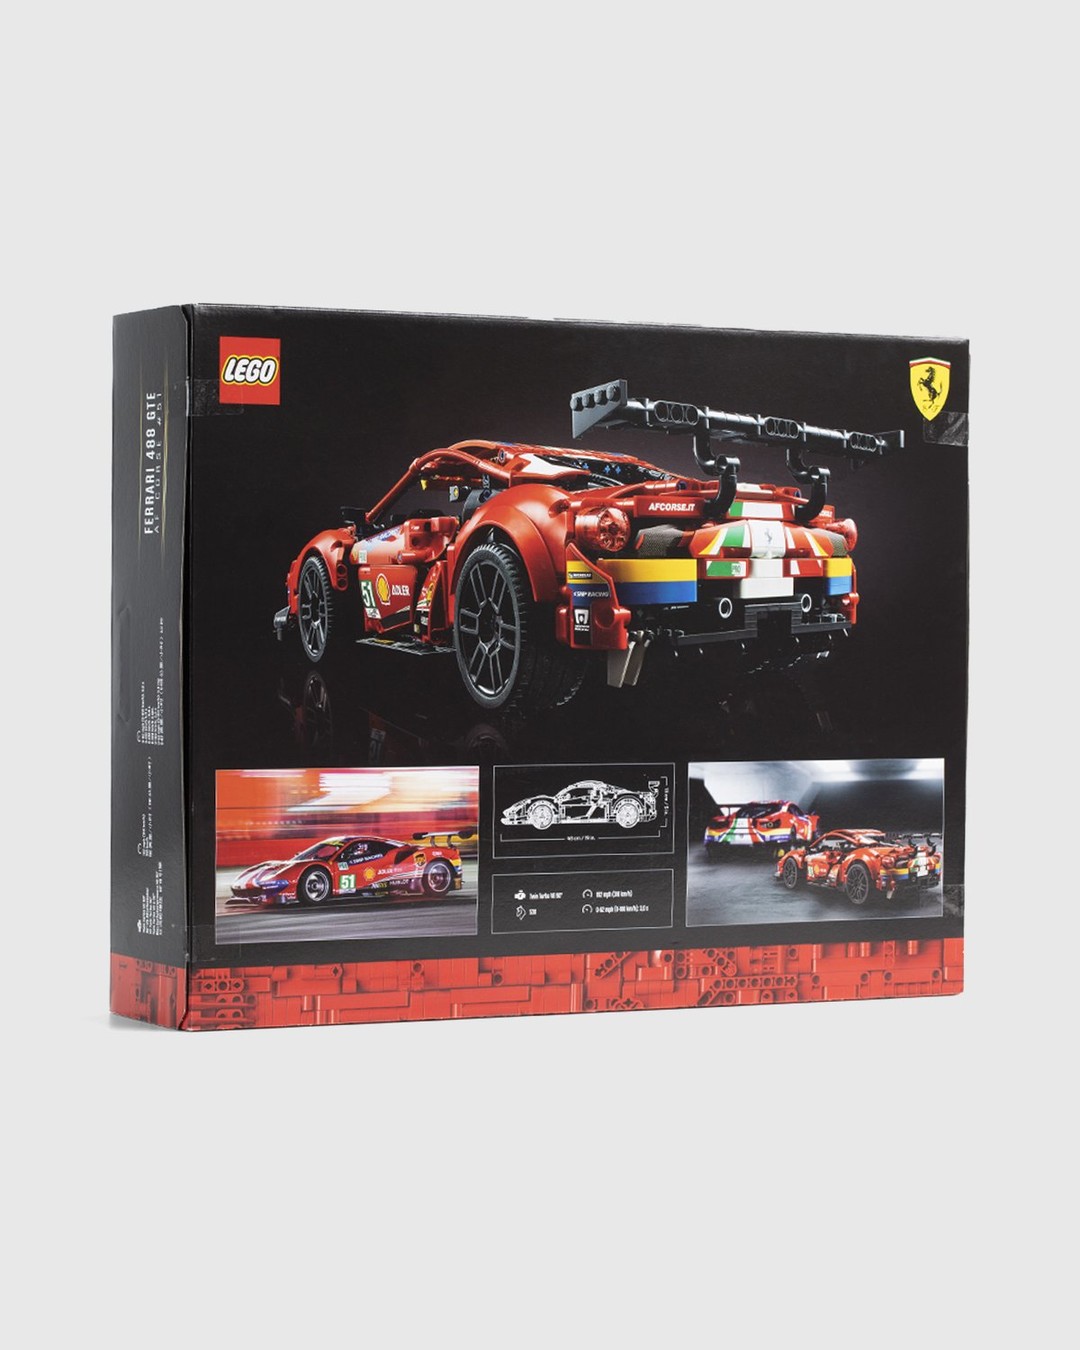 Lego – Technic Ferrari 488 GTE AF Corse 51 Red - Arts & Collectibles - Red - Image 4